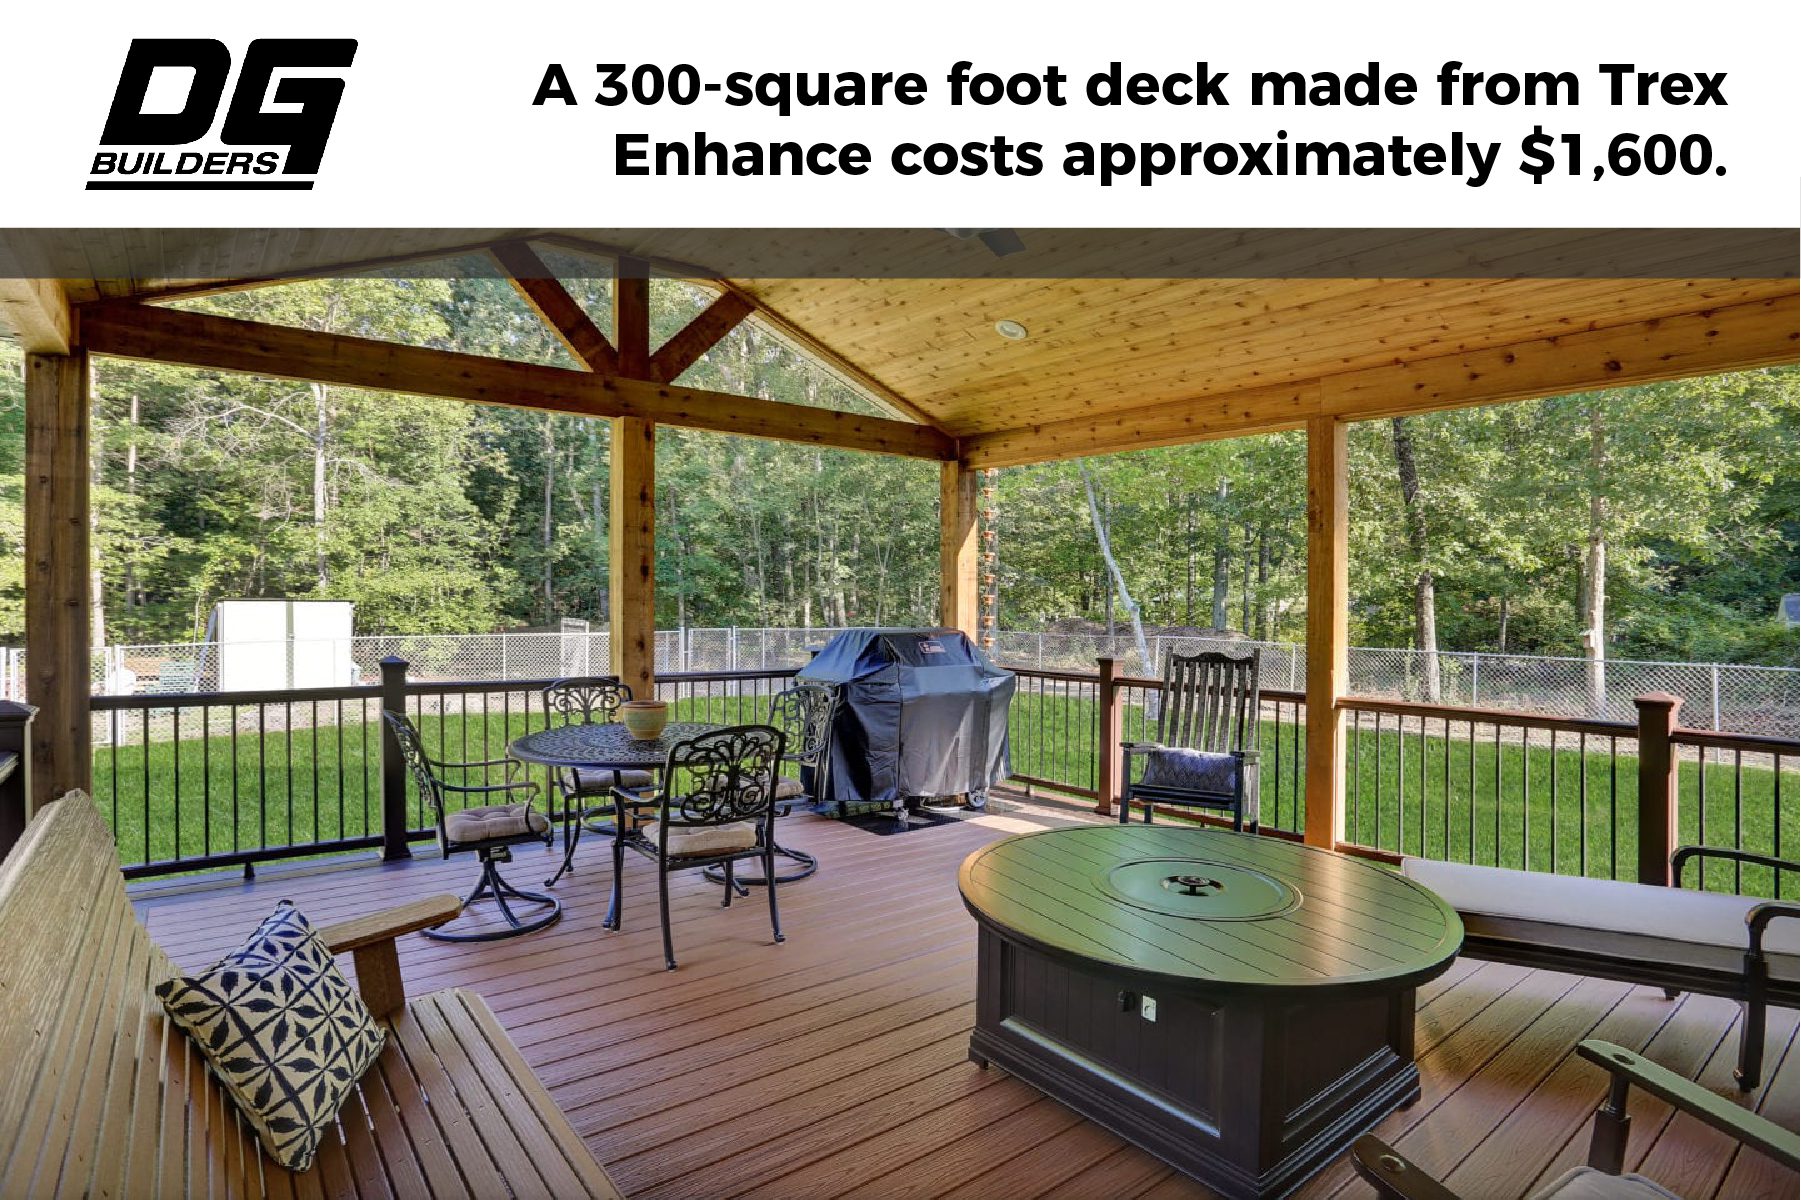 What does a 300 square foot Trex deck cost